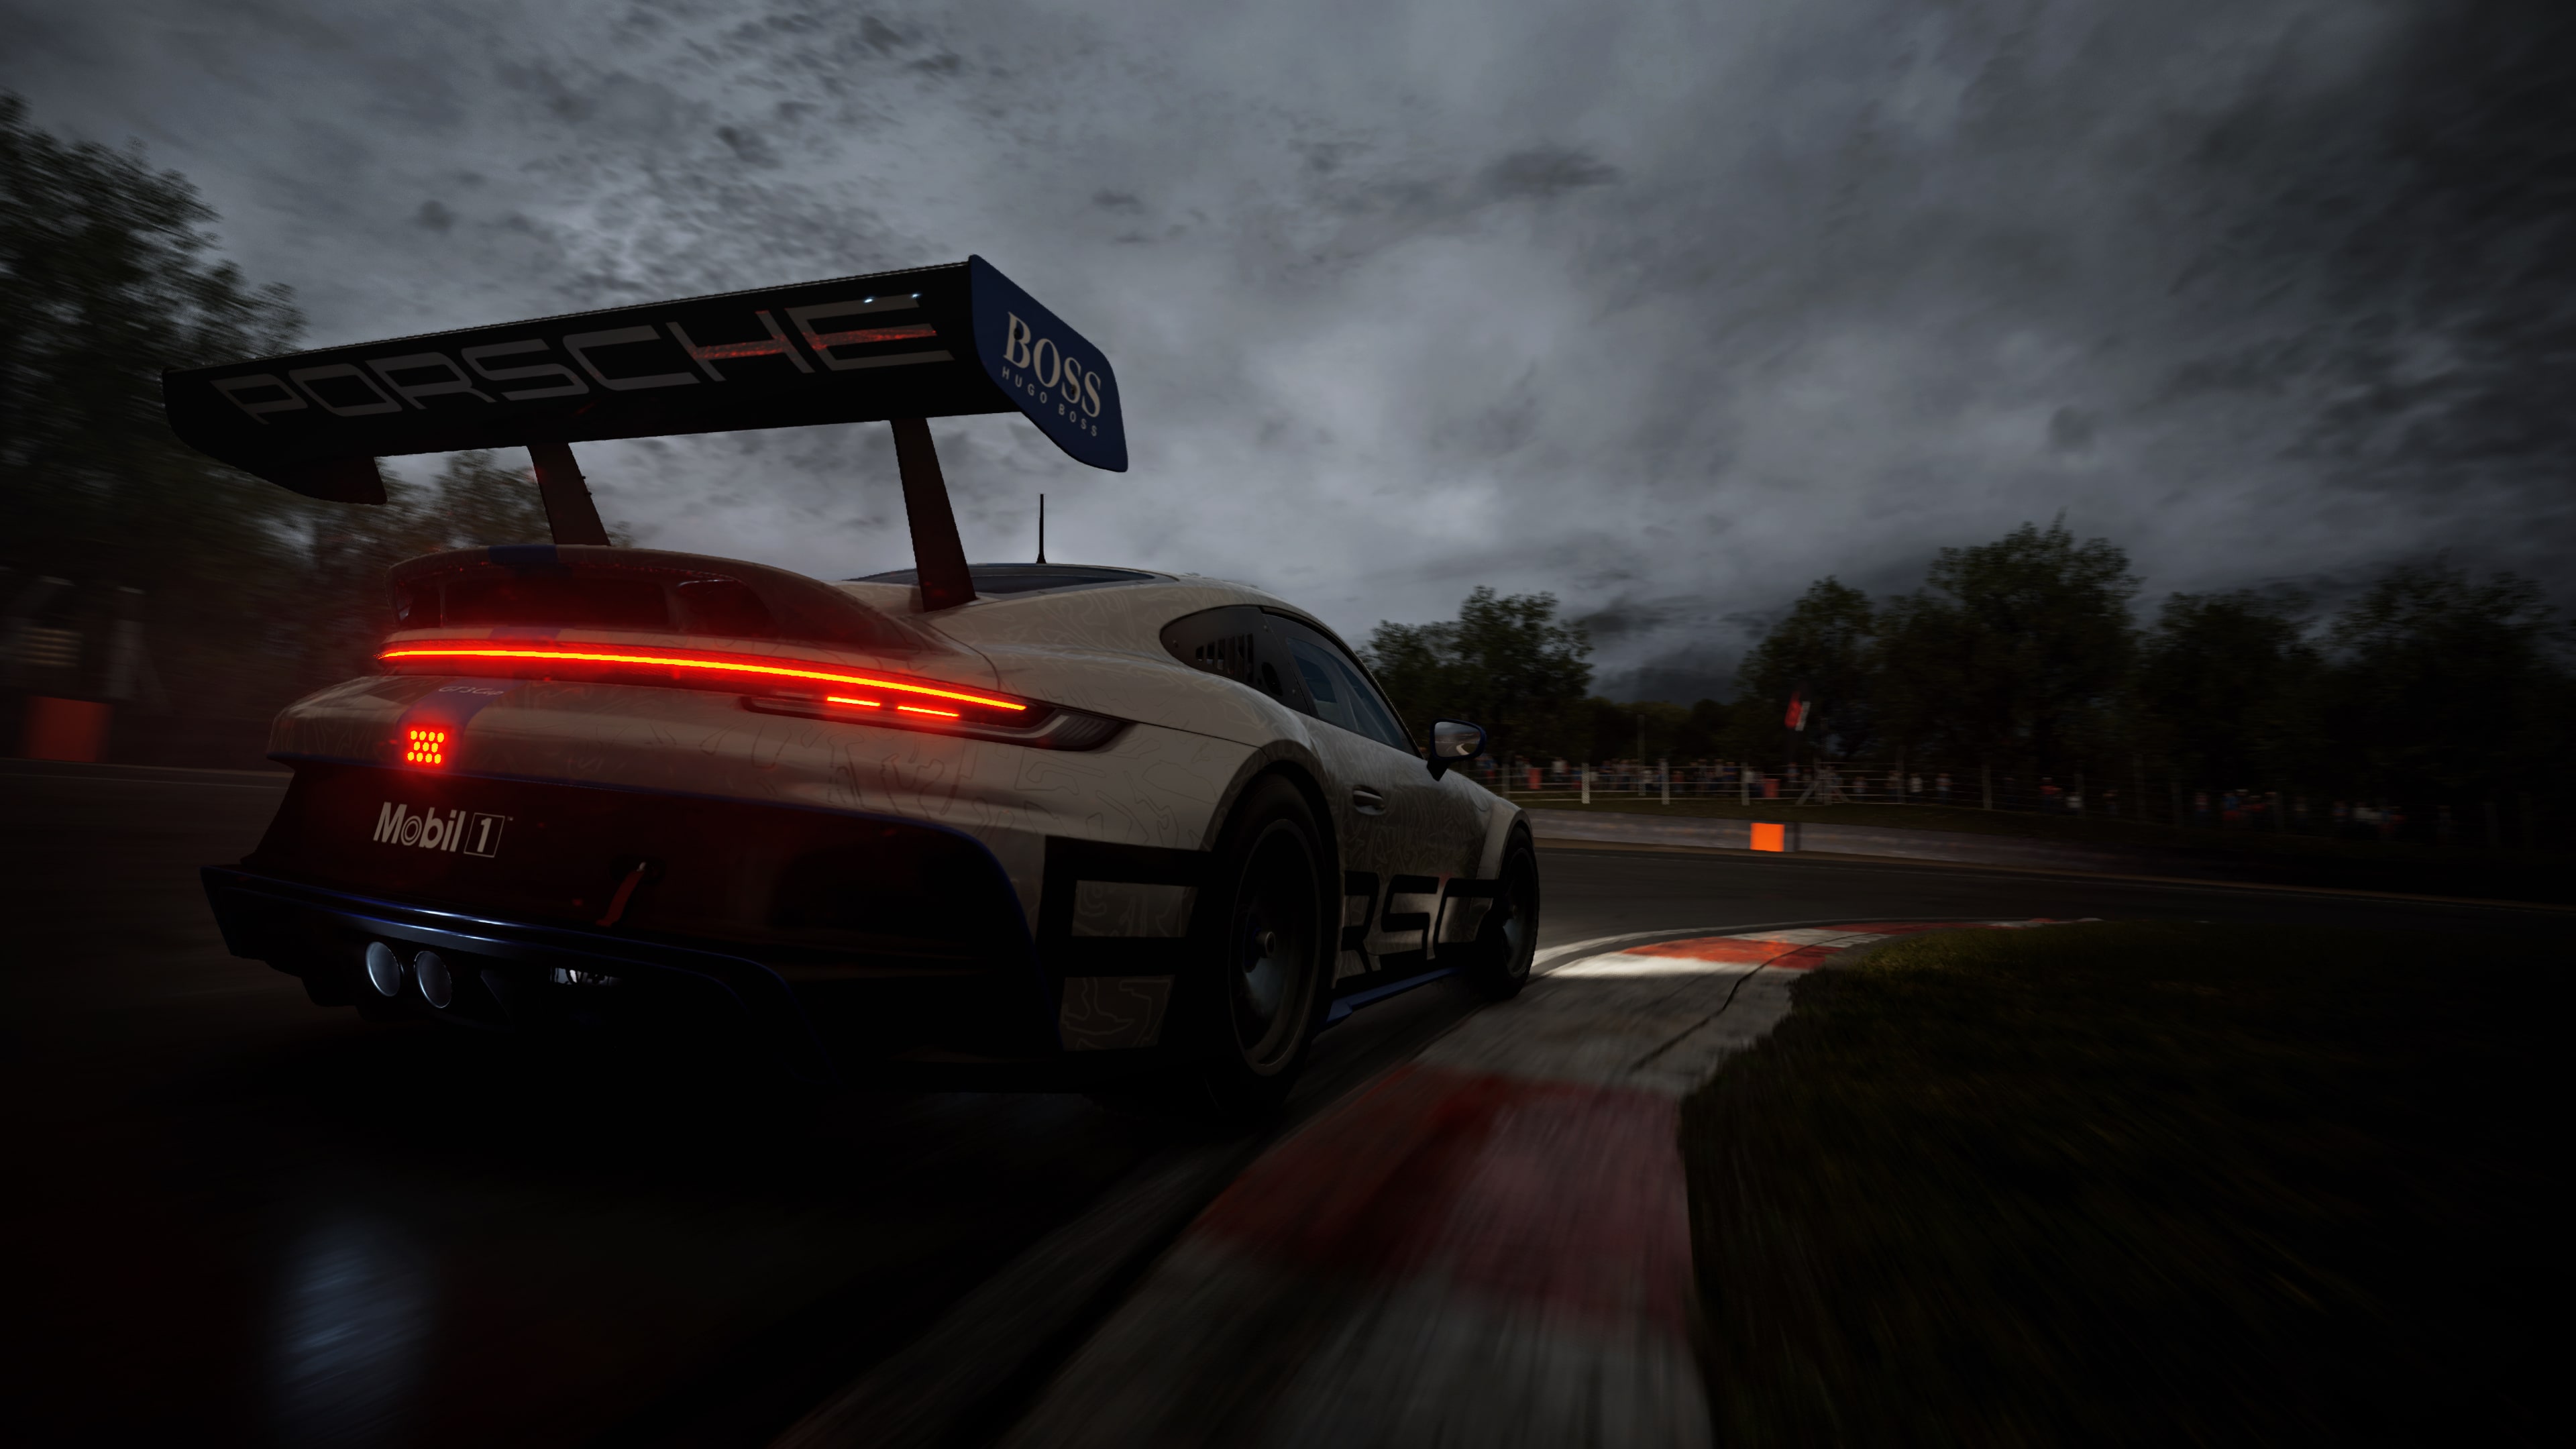 Assetto Corsa Competizione PS5 — Gt4 Pack DLC on PS4 PS5 — price history,  screenshots, discounts • USA